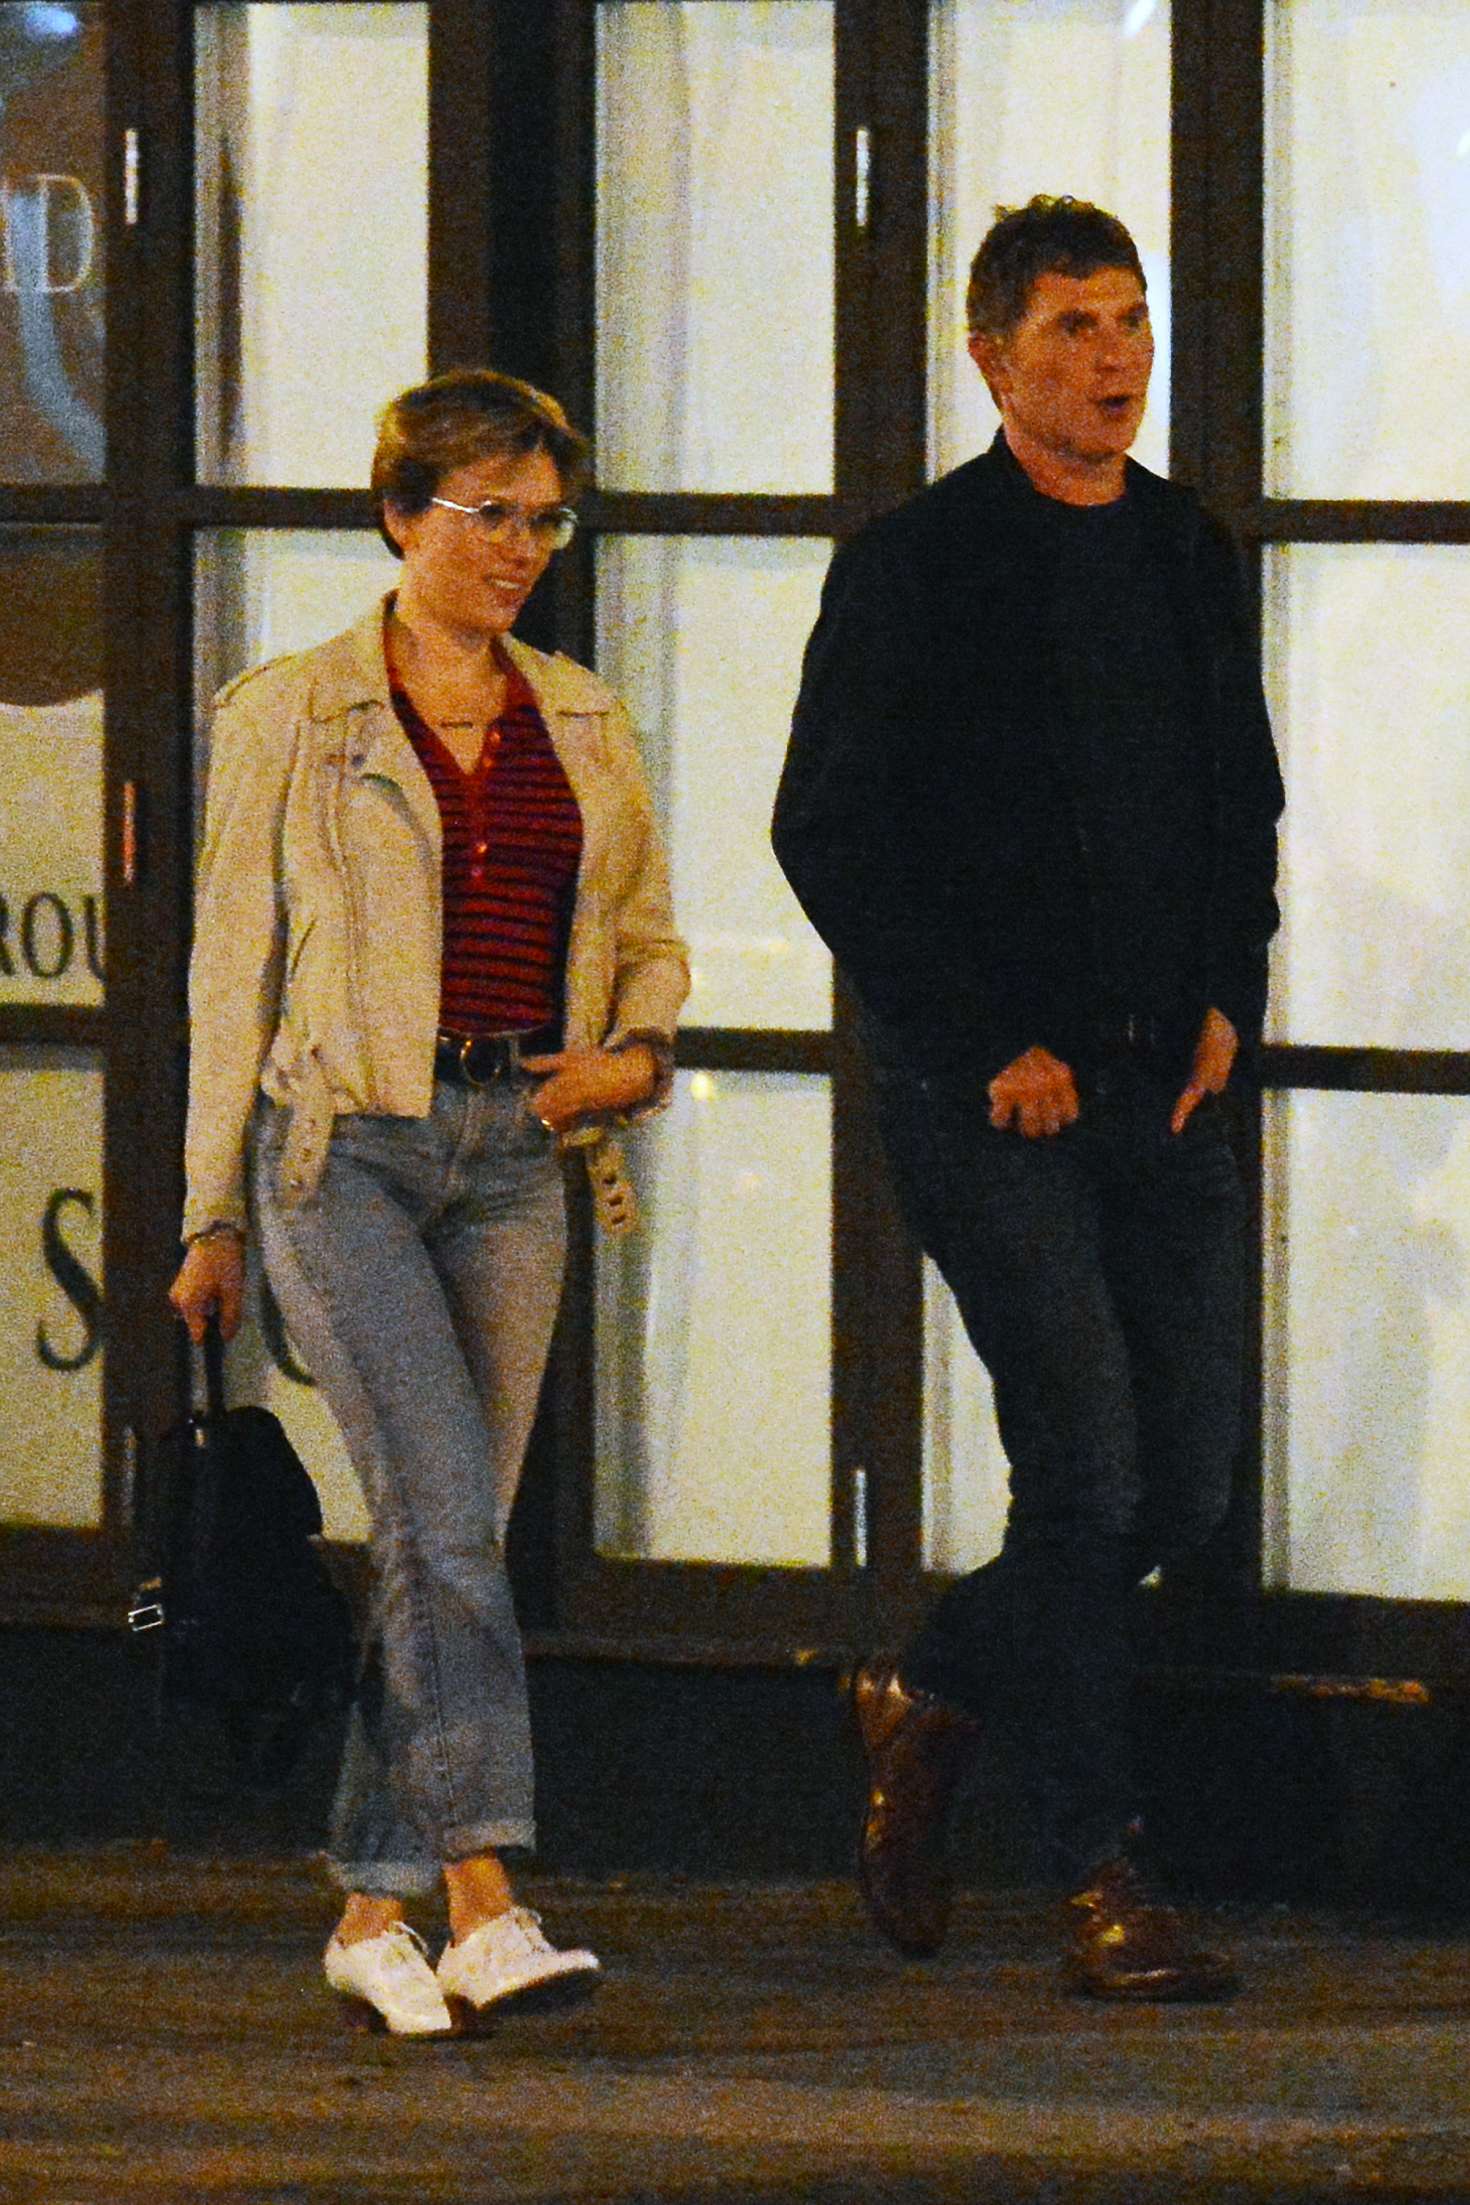 Scarlett Johansson and Bobby Flay out for a dinner in NY